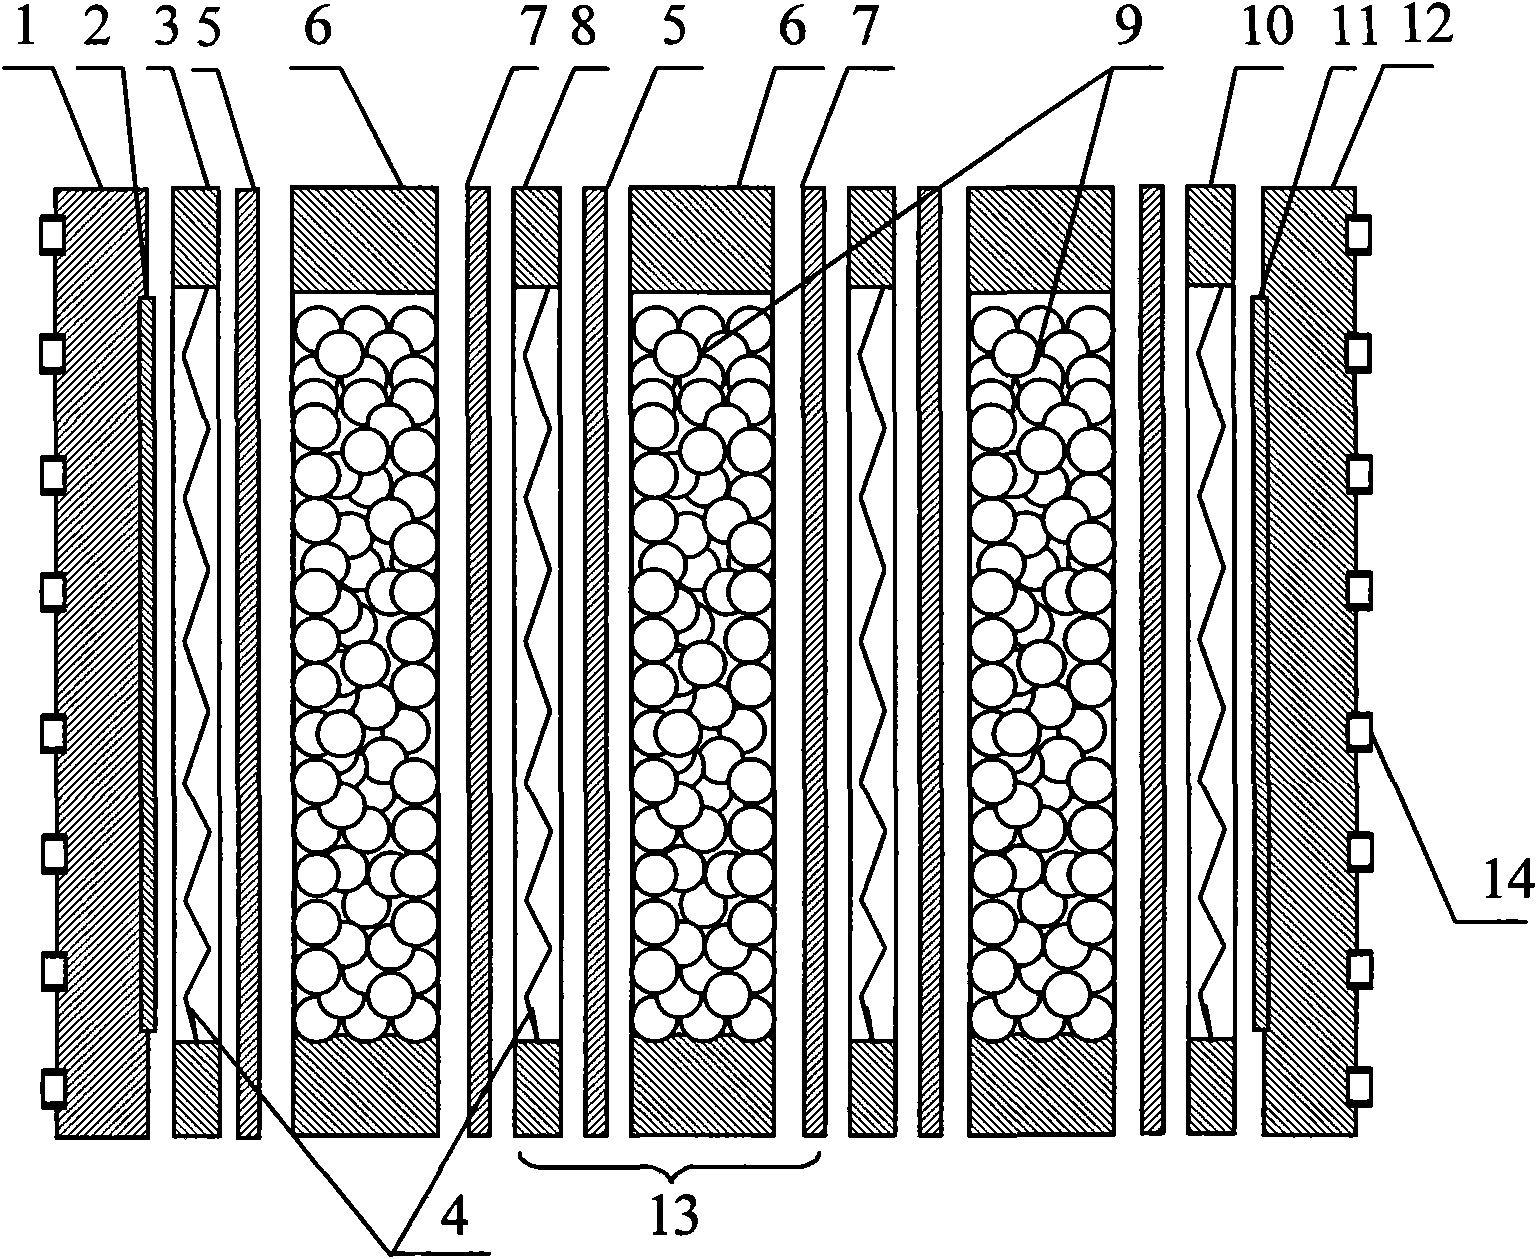 Electric regenerating device for inactive ion exchange resin